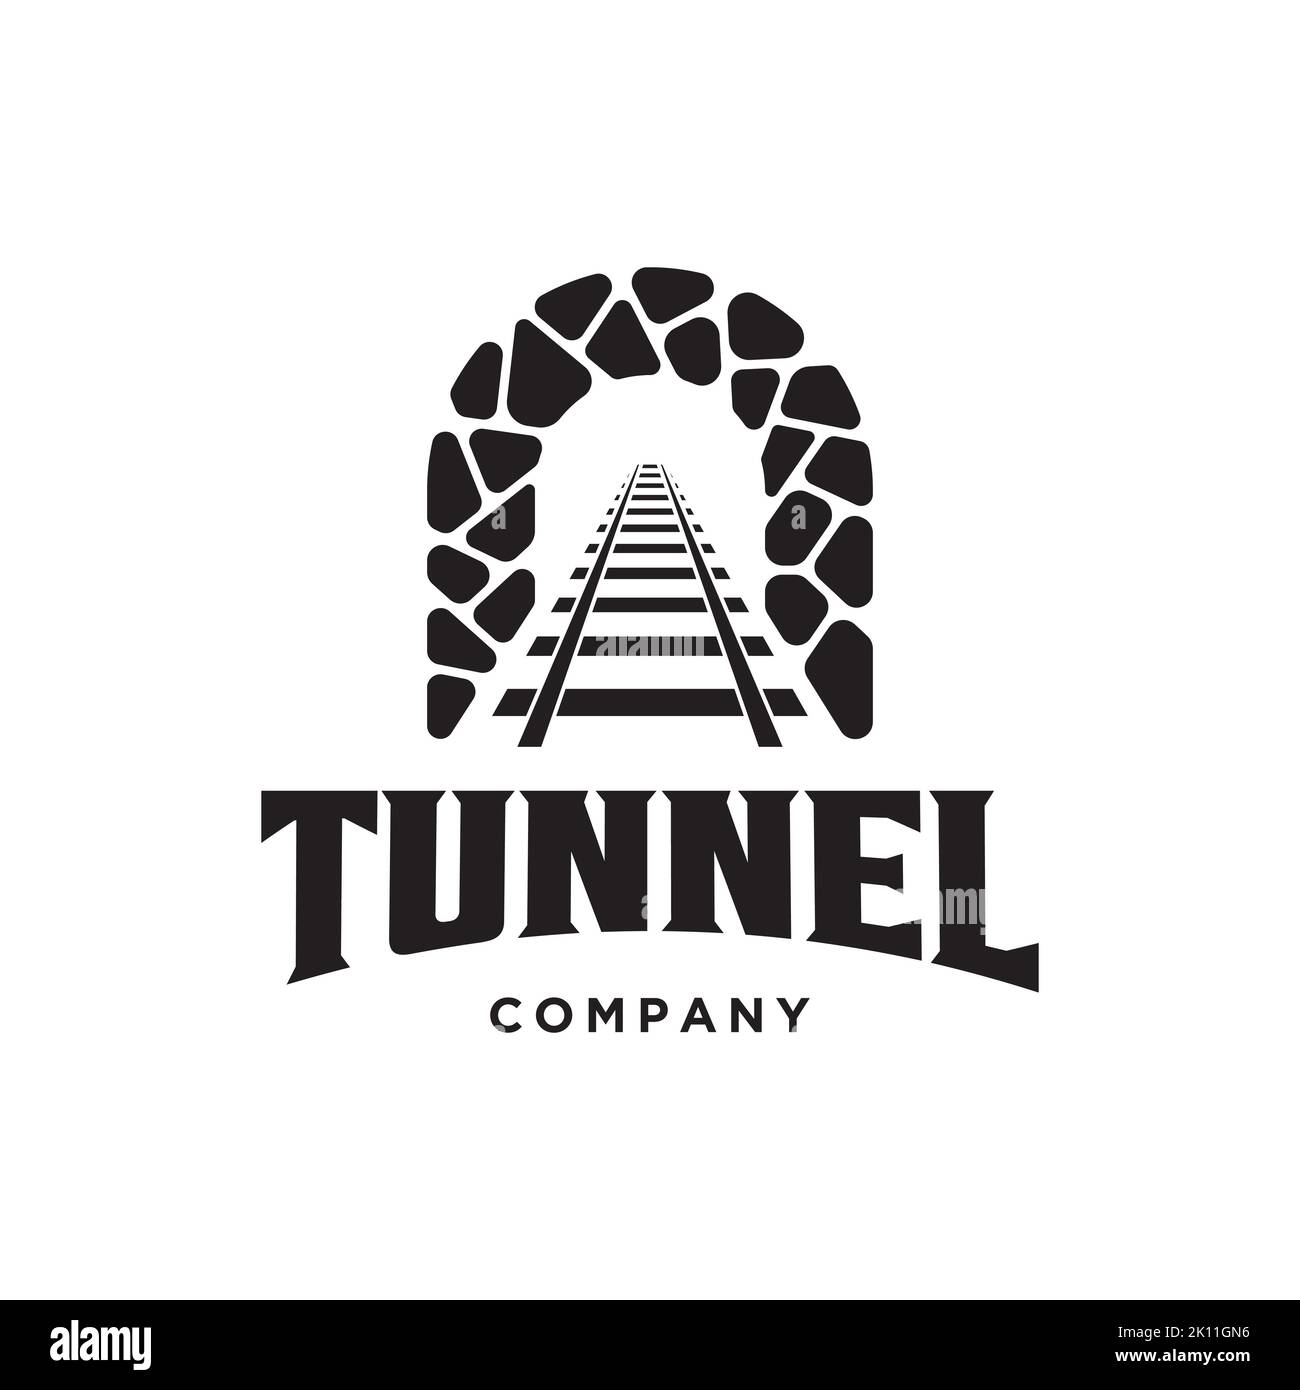 rail with tunnel logo design template Stock Vector